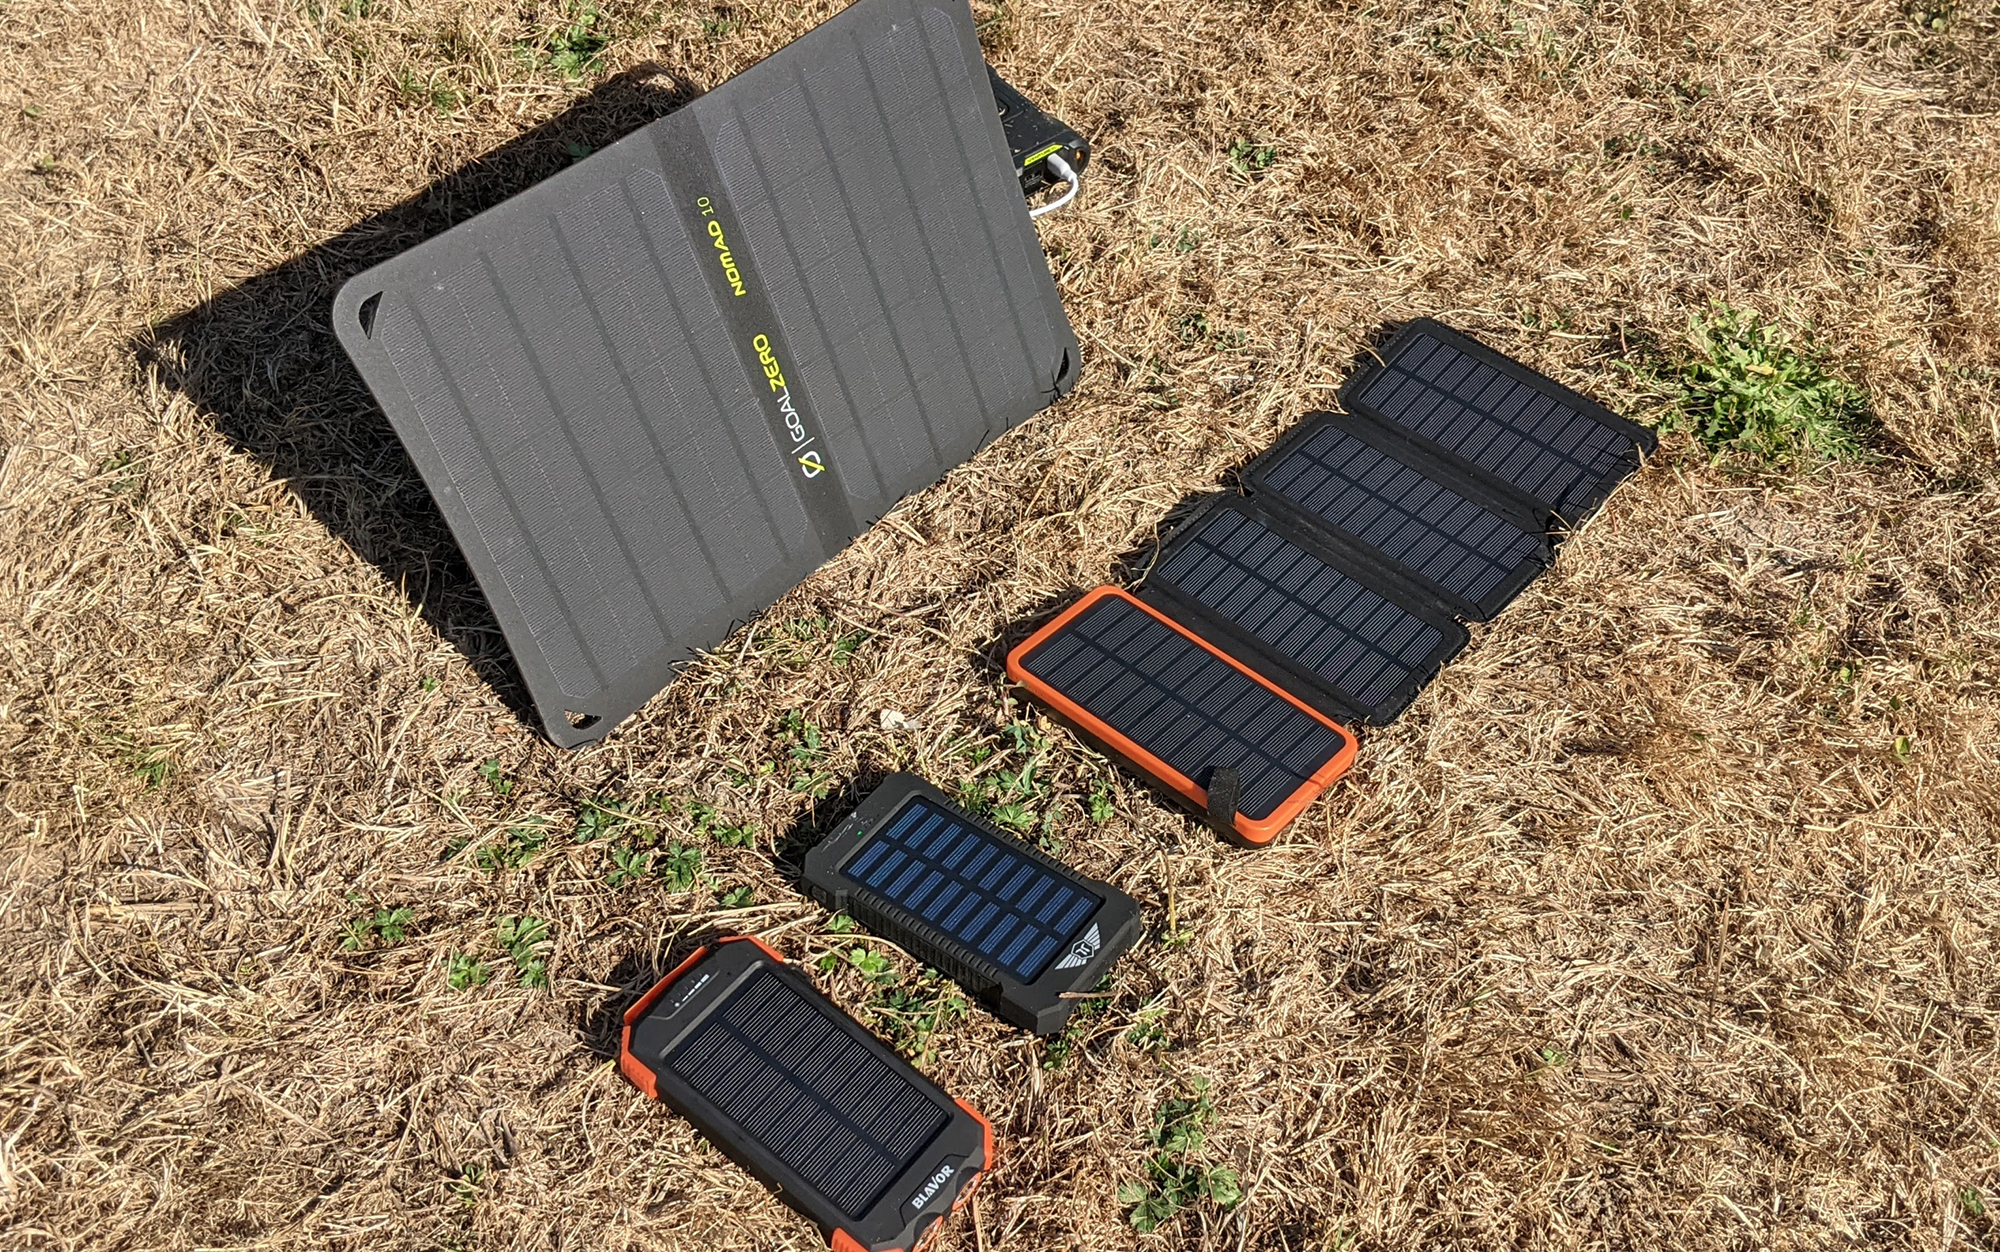 Testing the Goal Zero Nomad 10 and Venture 35 combo along with a smorgasbord of smartphone-sized solar chargers. 